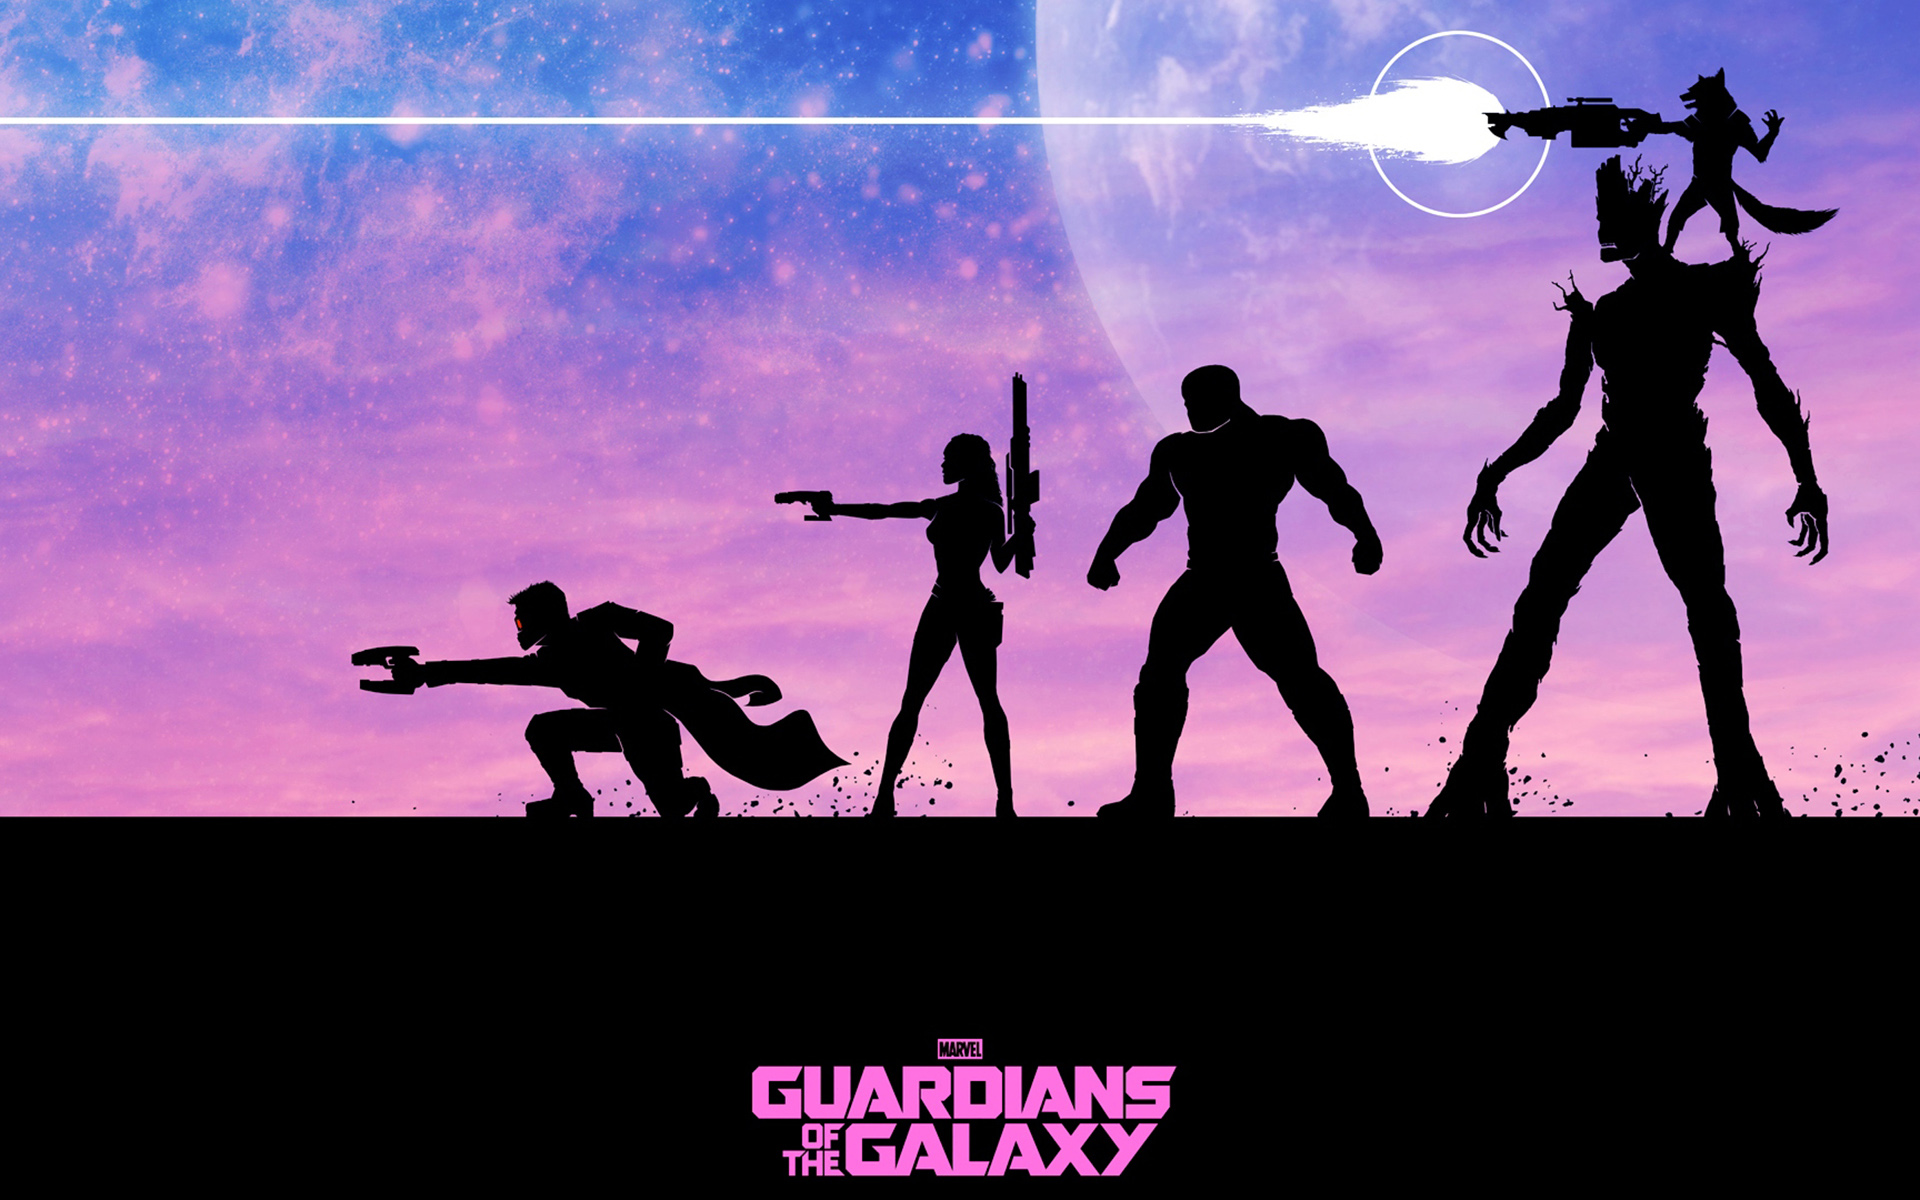 Guadians of the Galaxy Wallpaper